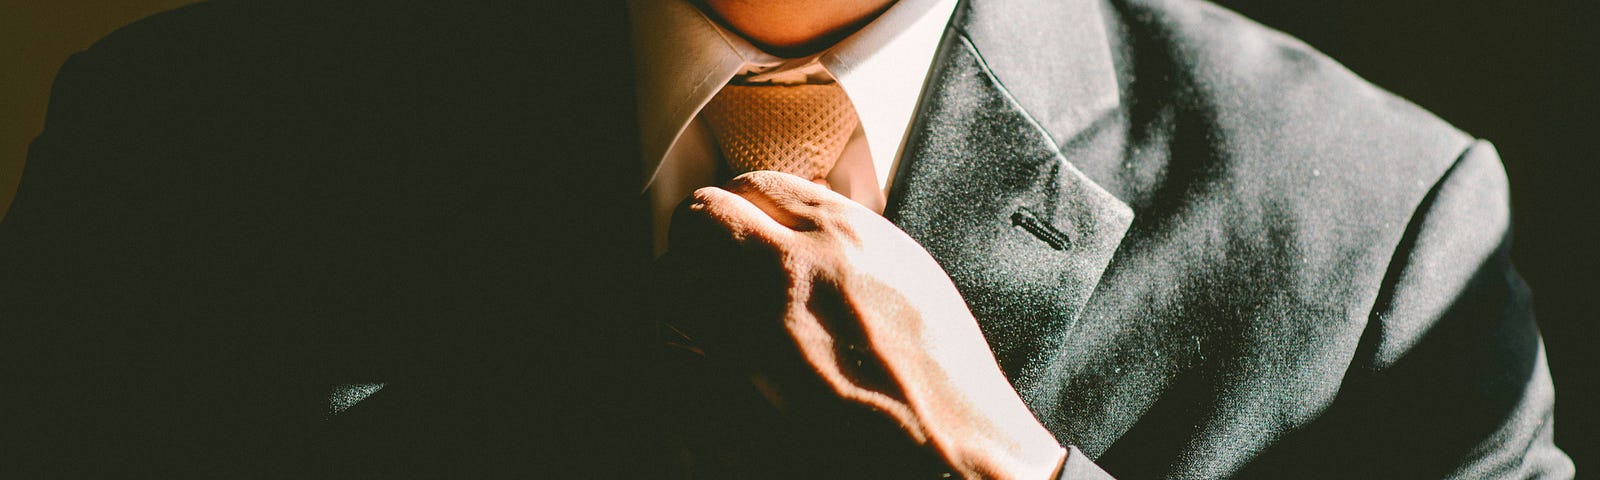 A close up on someone’s suit jacket as they tighten their tie